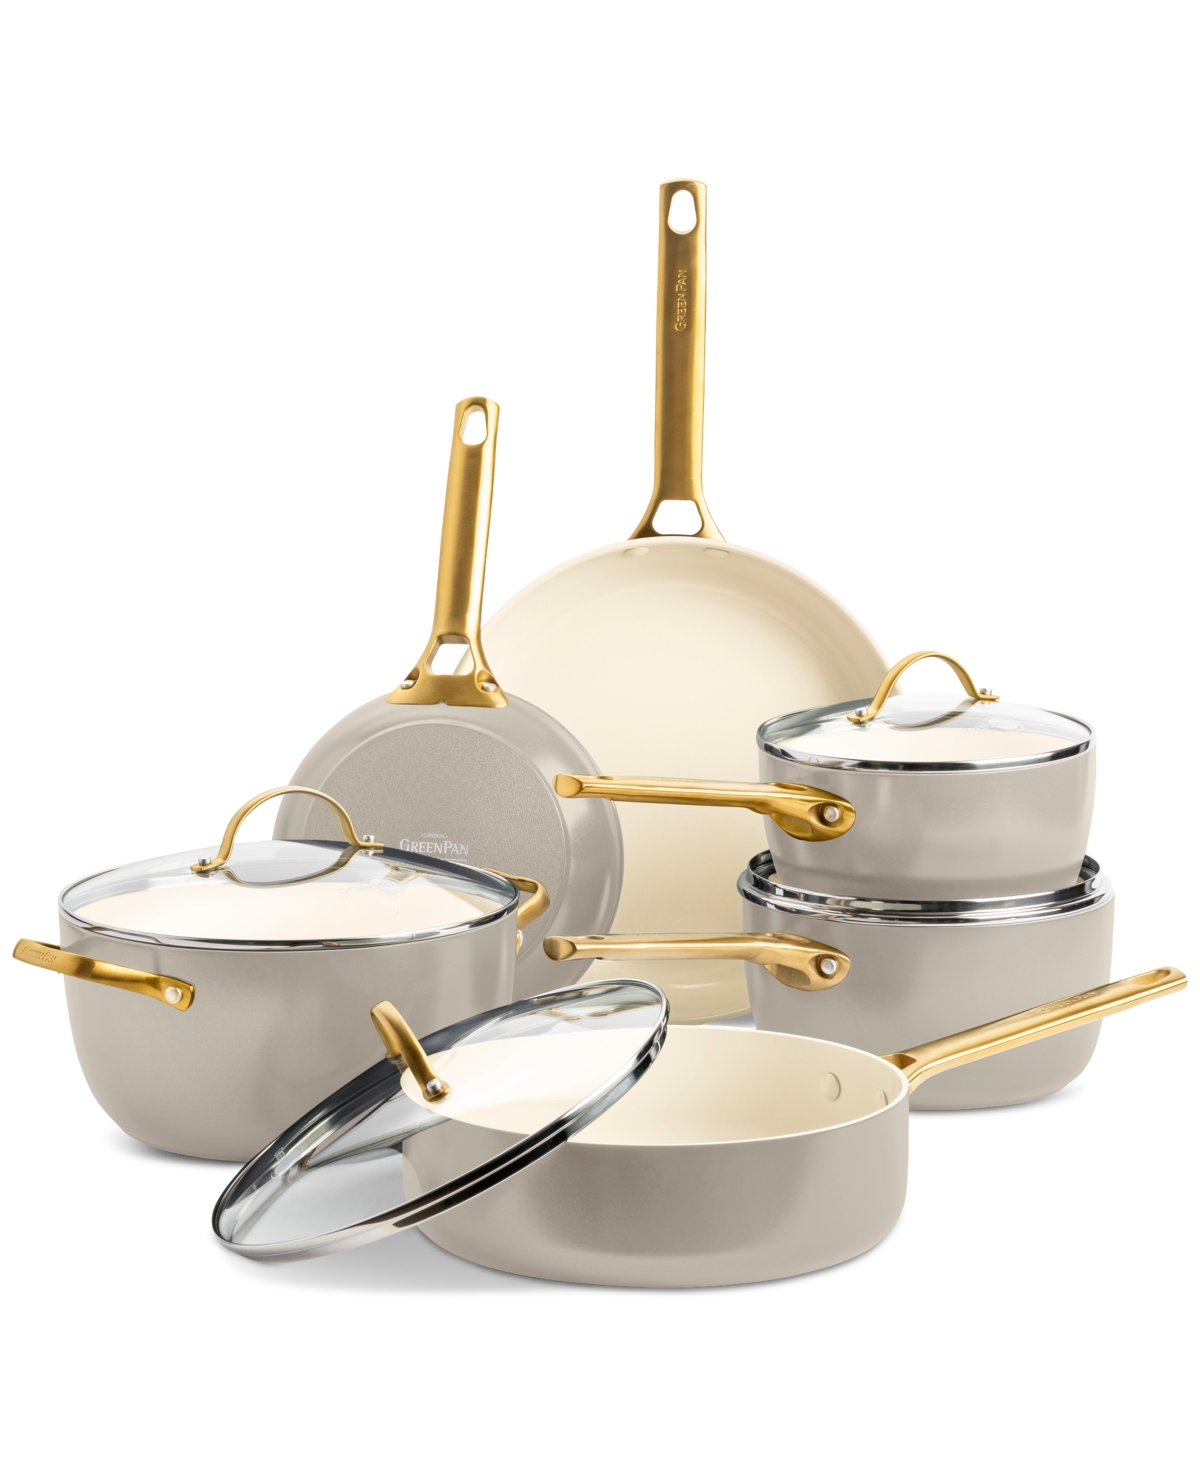 Greenpan Padova Healthy Ceramic Nonstick Cookware Set, 10 Piece In Taupe